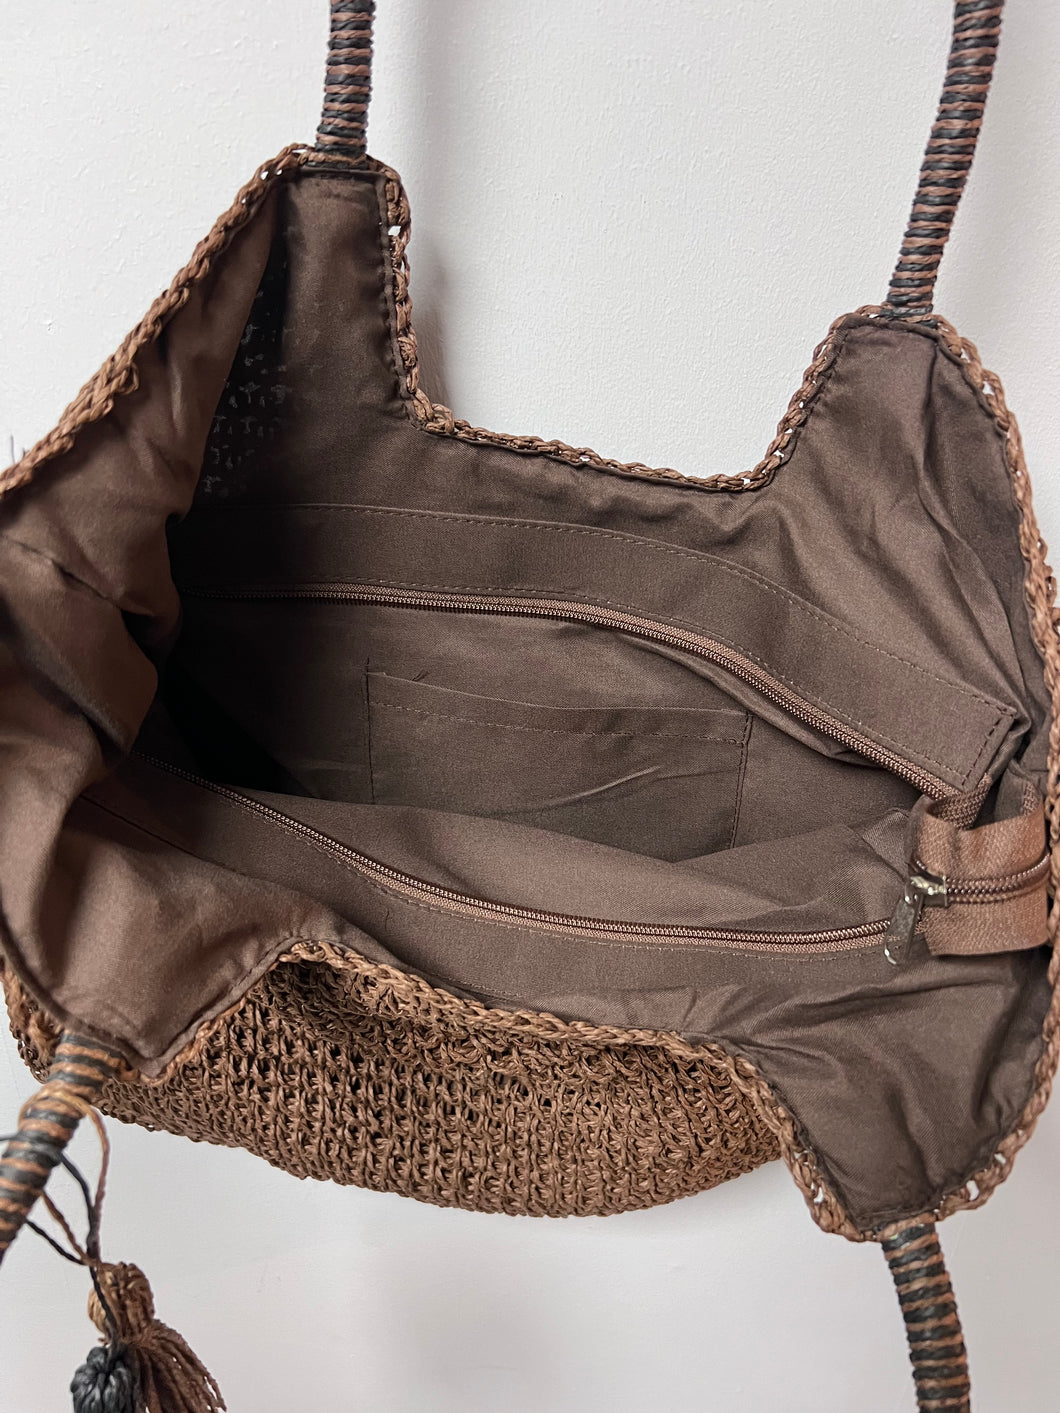 Natural Woven Basket with Tassels | Brown